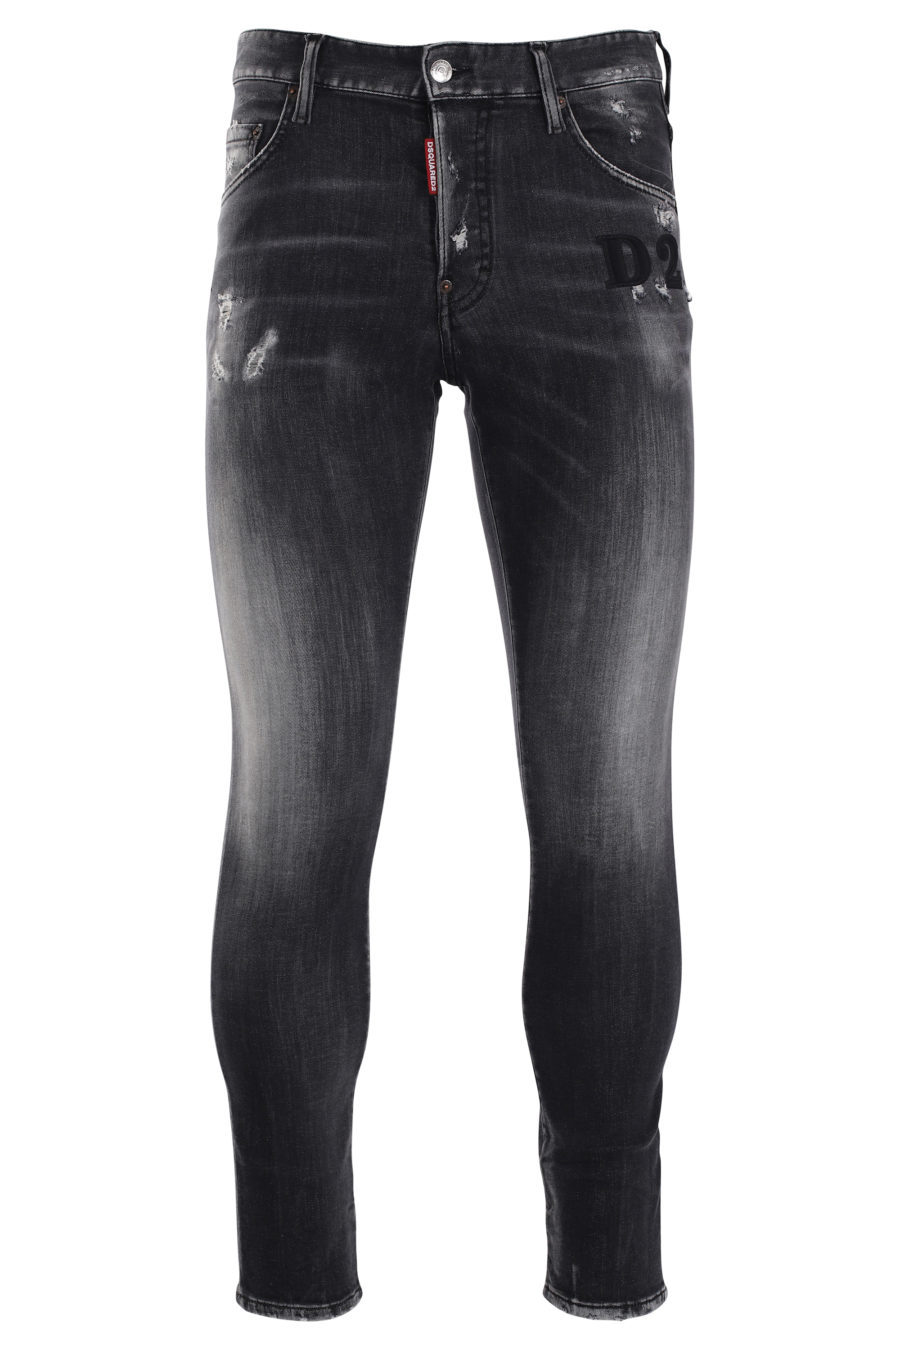 Denim skater trousers with black worn-out jeans and black "D2" logo - IMG 9986